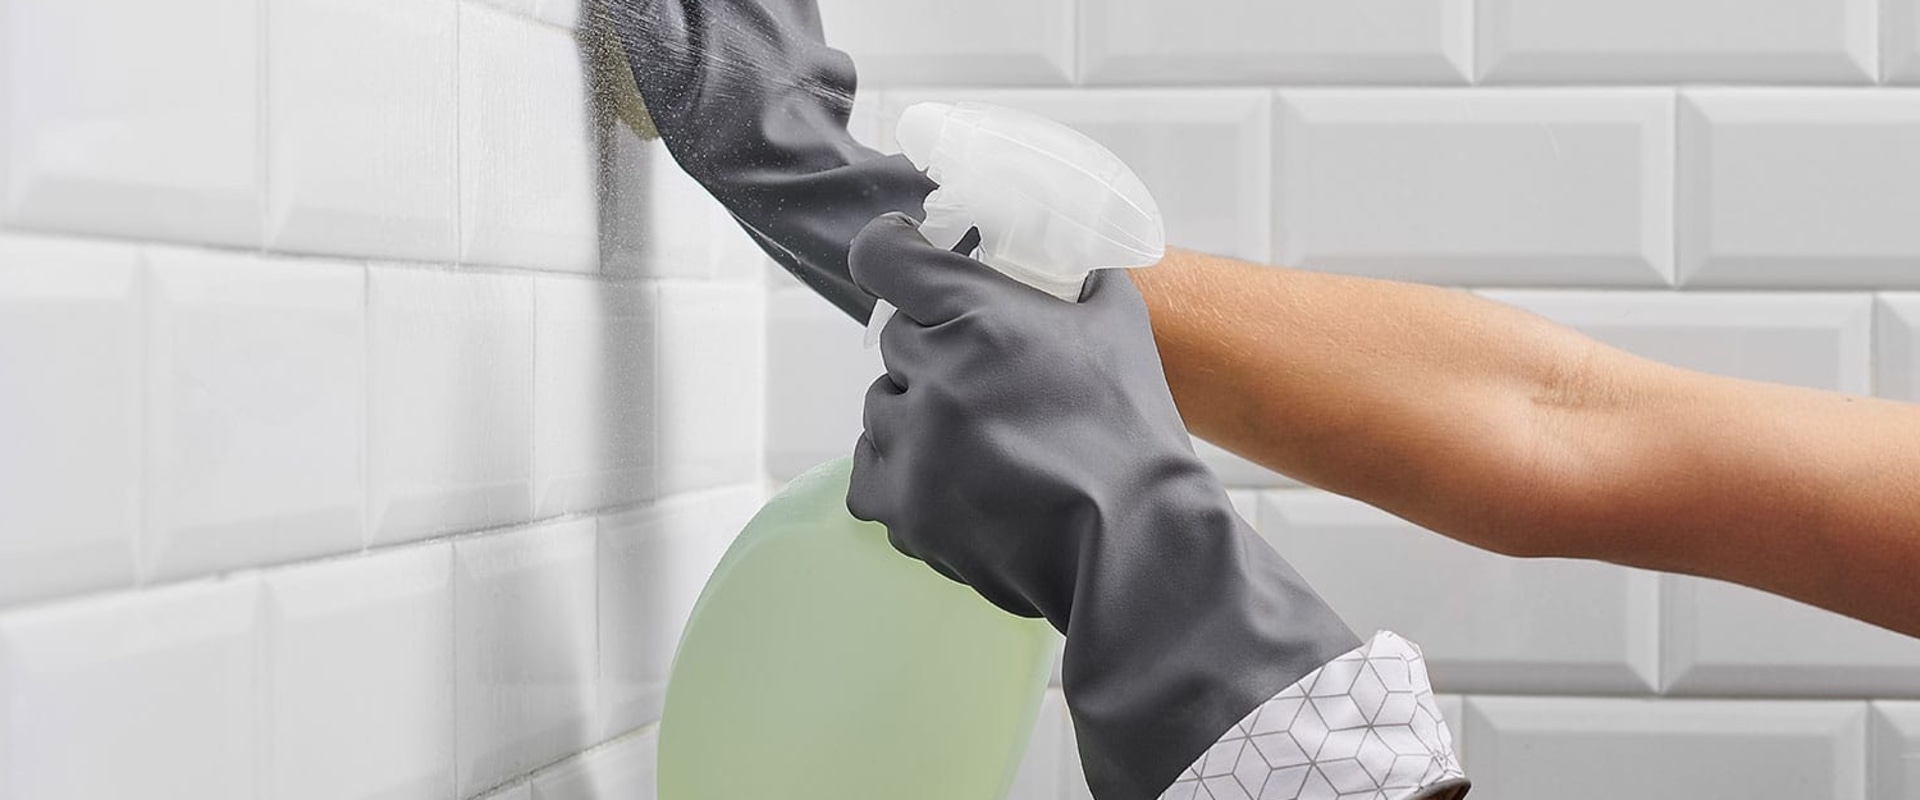 What does standard cleaning include?